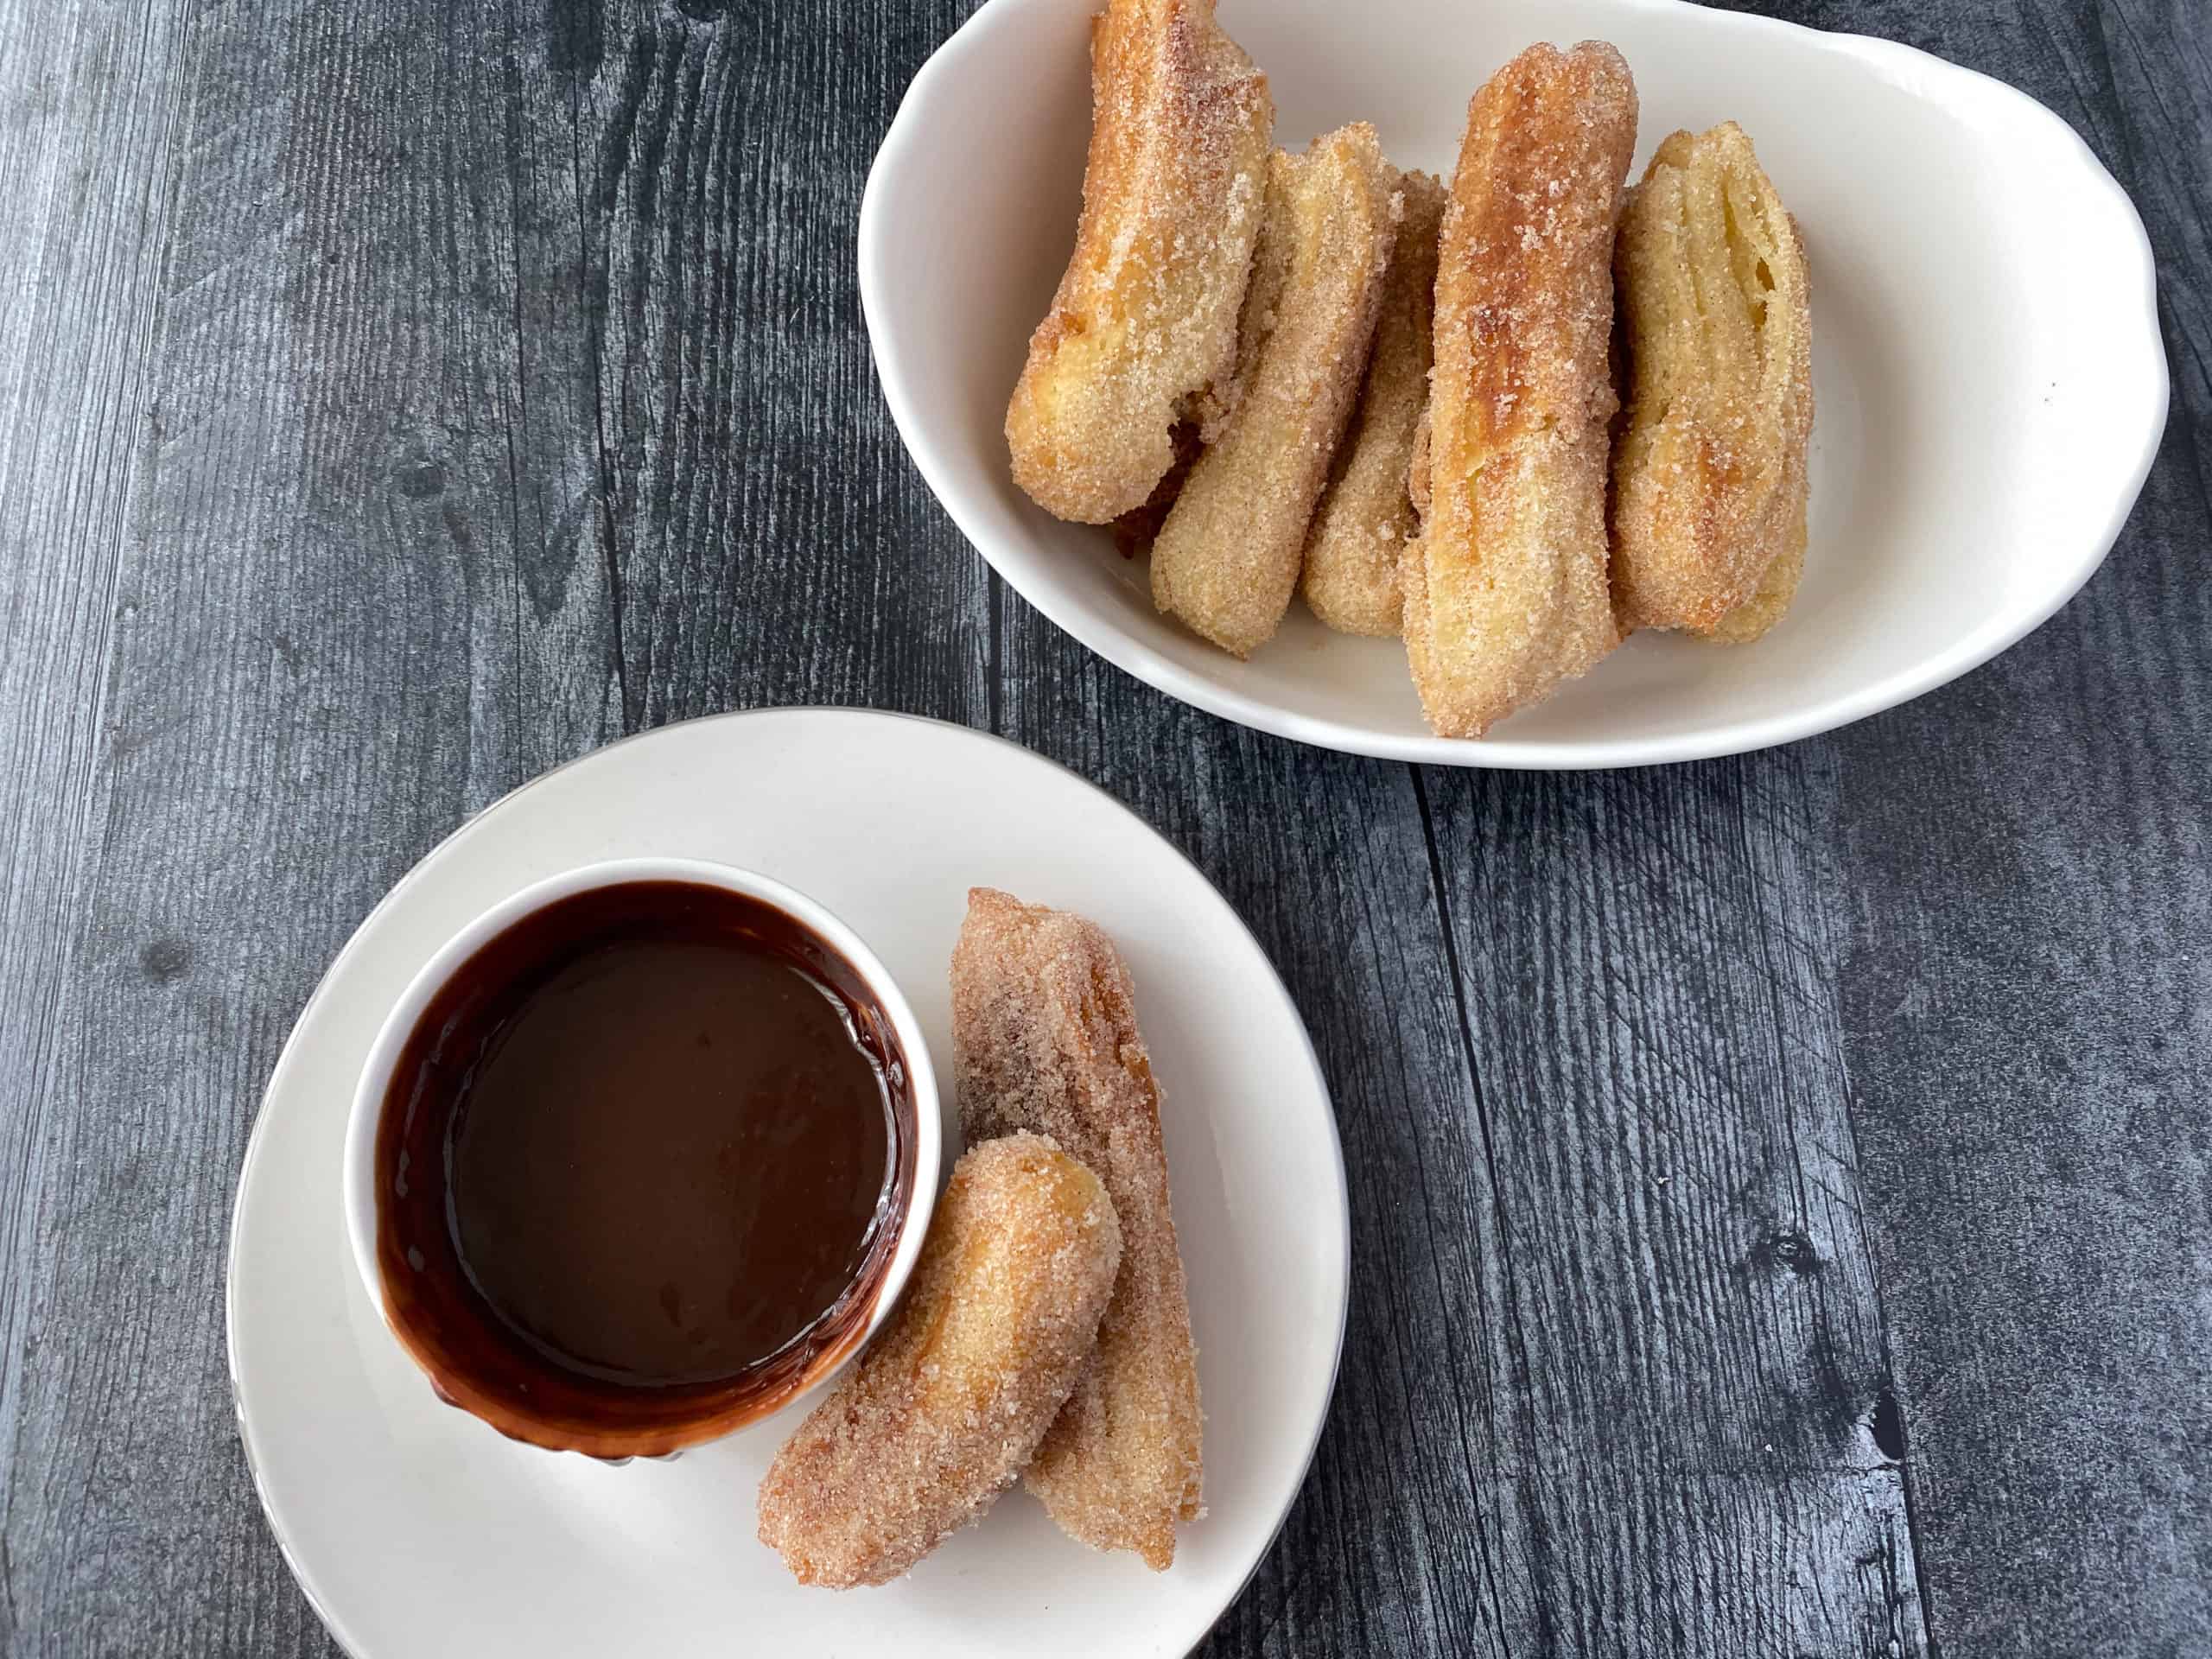 How To Make The Most Delicious Homemade Churros